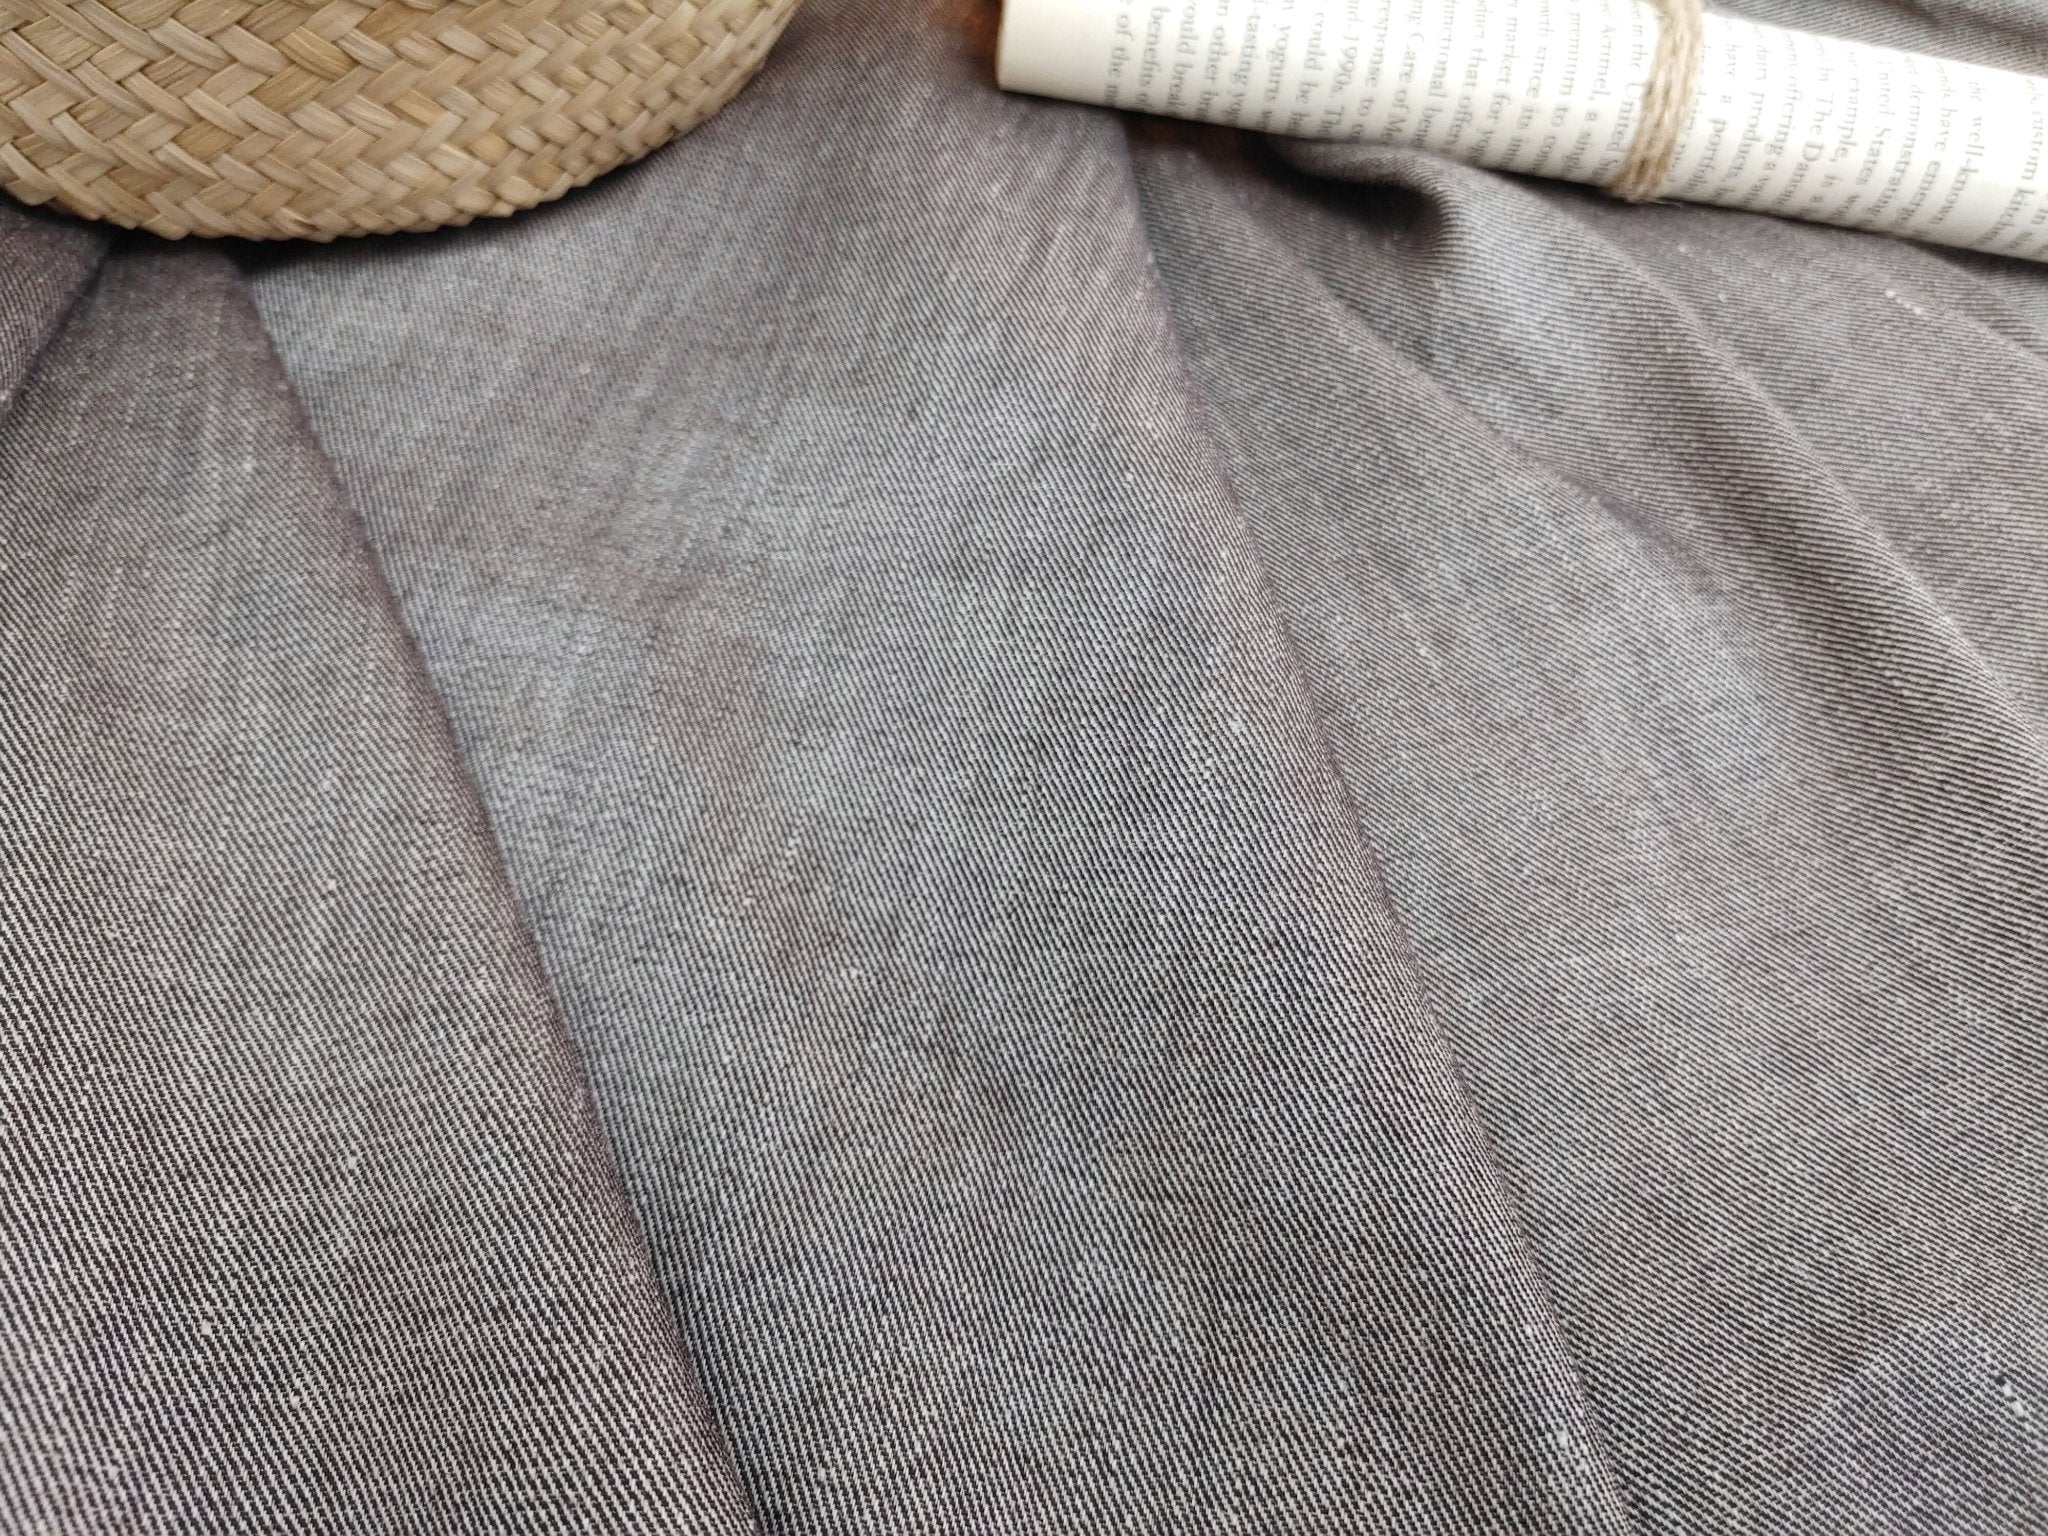 Simple Duo: Two-Tone Chambray Linen Twill Stretch Fabric 3201 4949 6504 - The Linen Lab - Beige